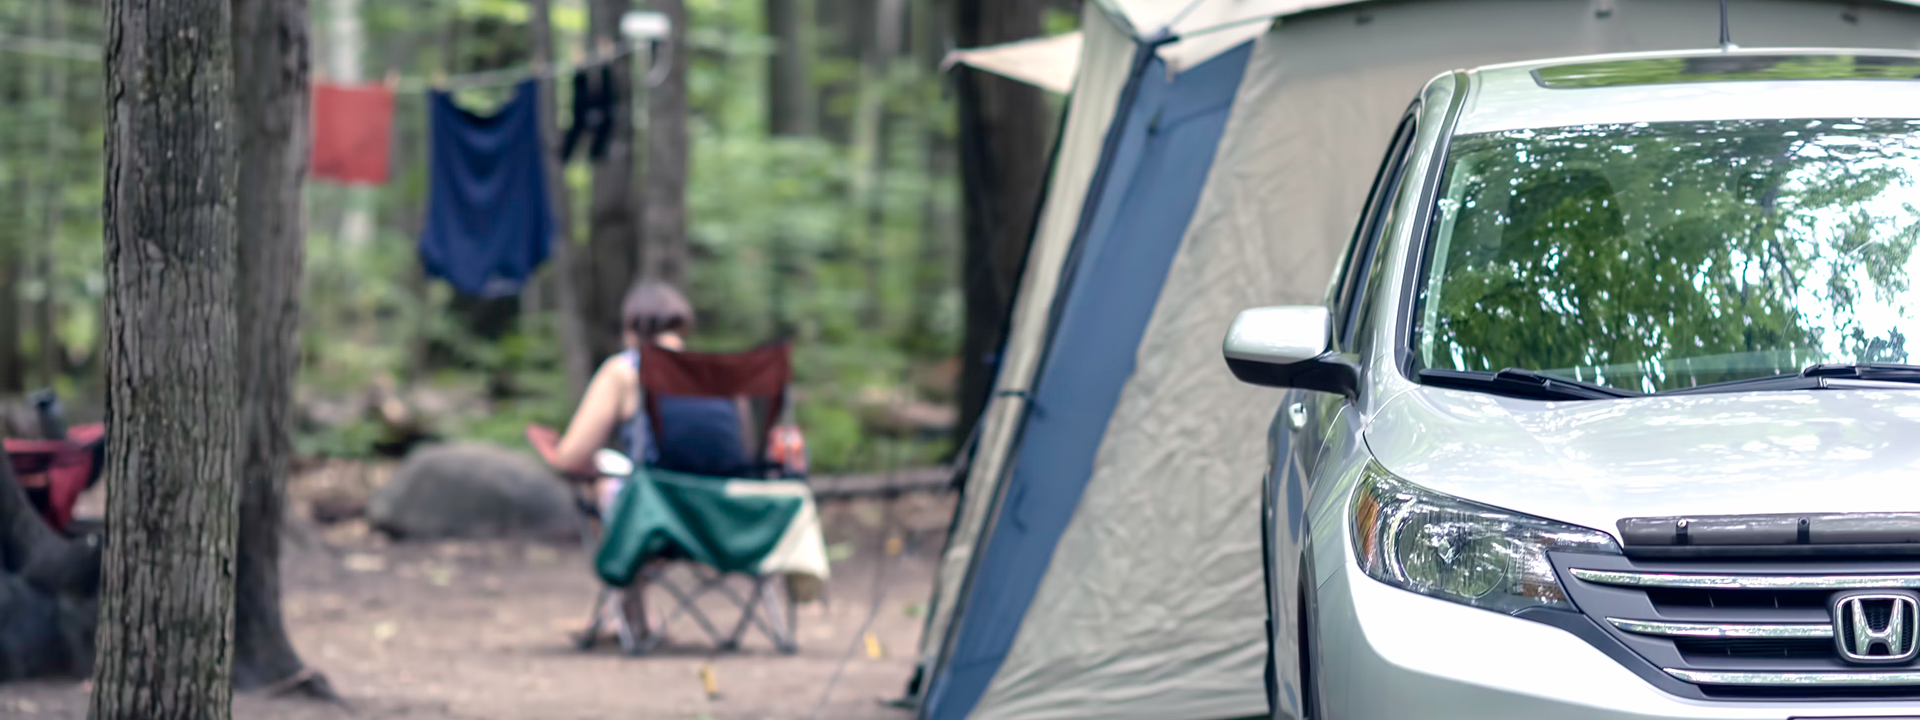 Choose the best vehicle for car camping